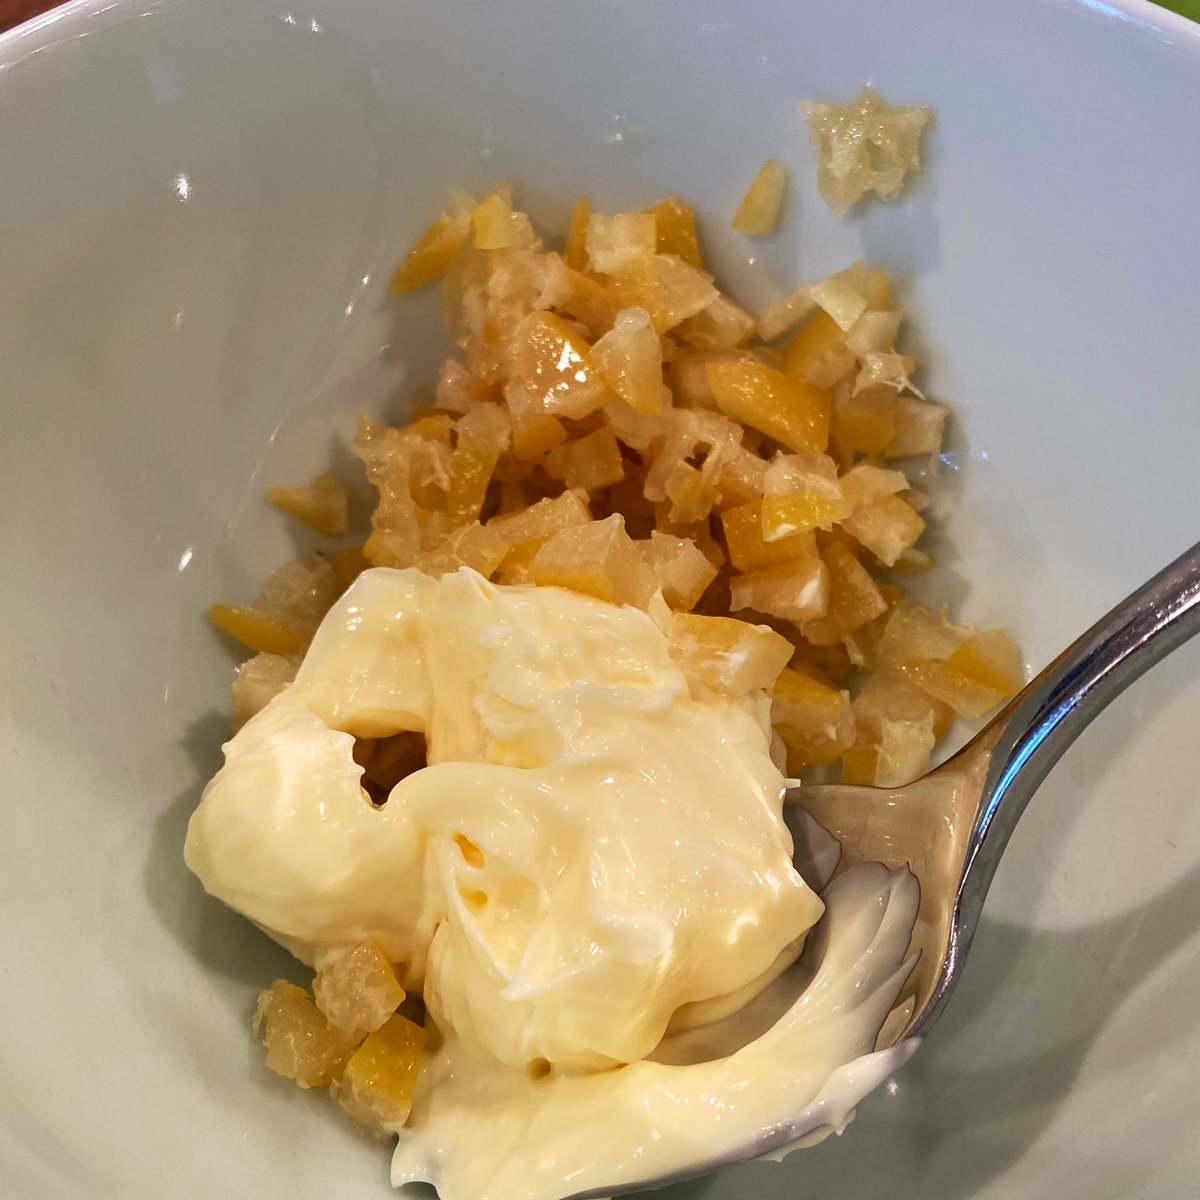 Let’s start with these diced preserved lemons, because of course I’m going to add lemons to them. Stir in mayo because something has to hold it all together.“That smells good!” says 3.She’s a pathological liar.